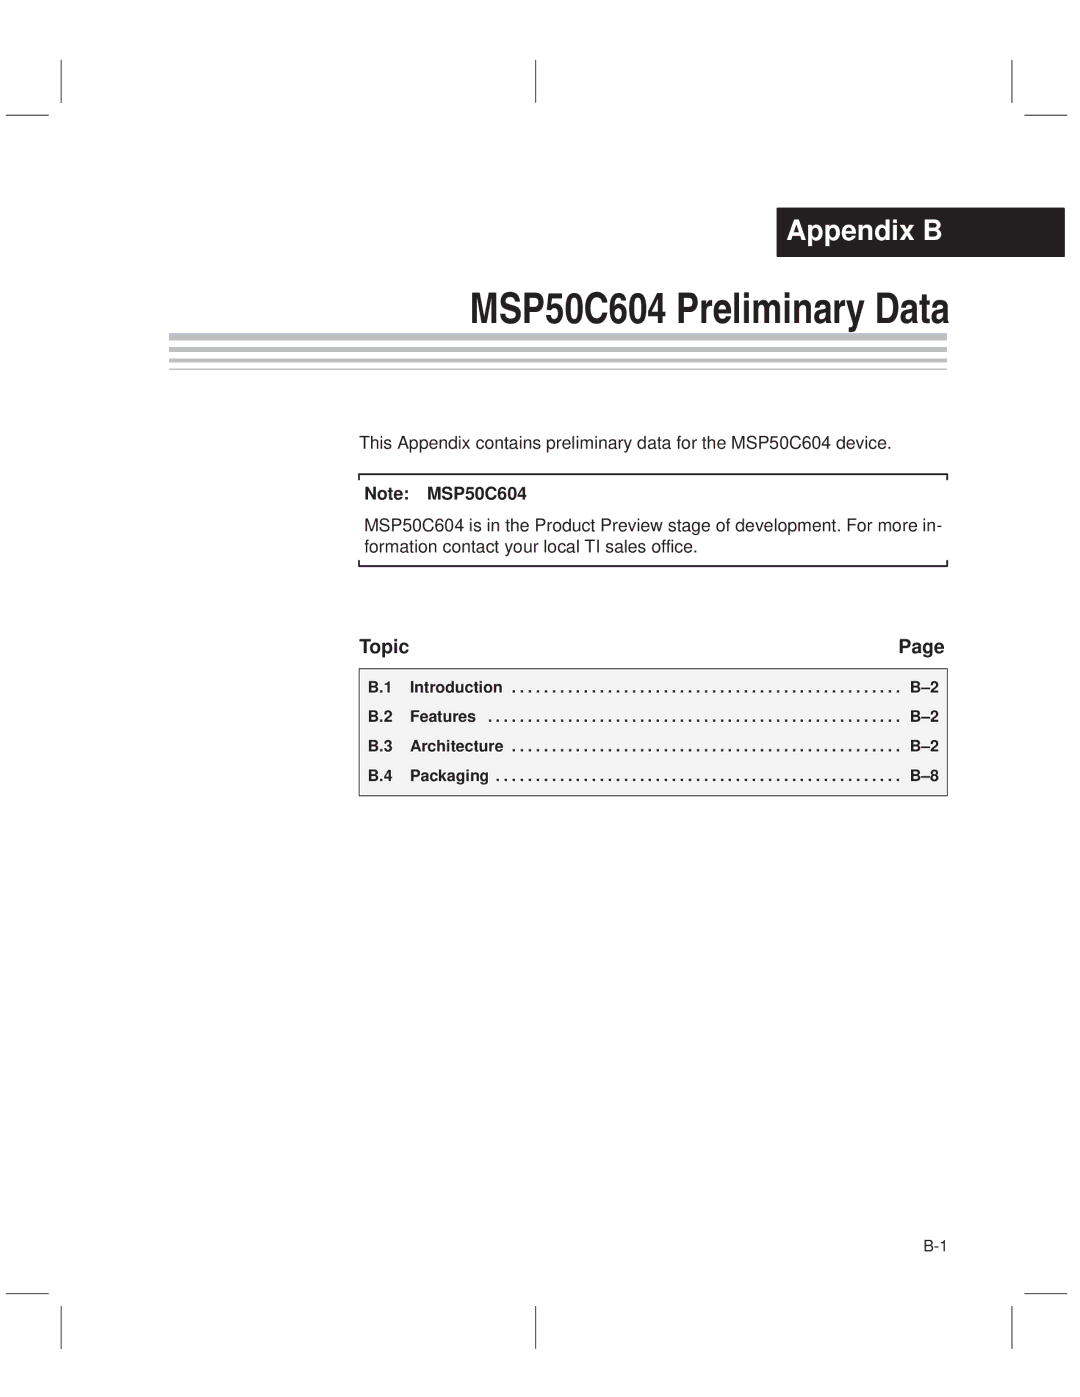 Texas Instruments MSP50C614 manual MSP50C604 Preliminary Data, Introduction Features Architecture Packaging 